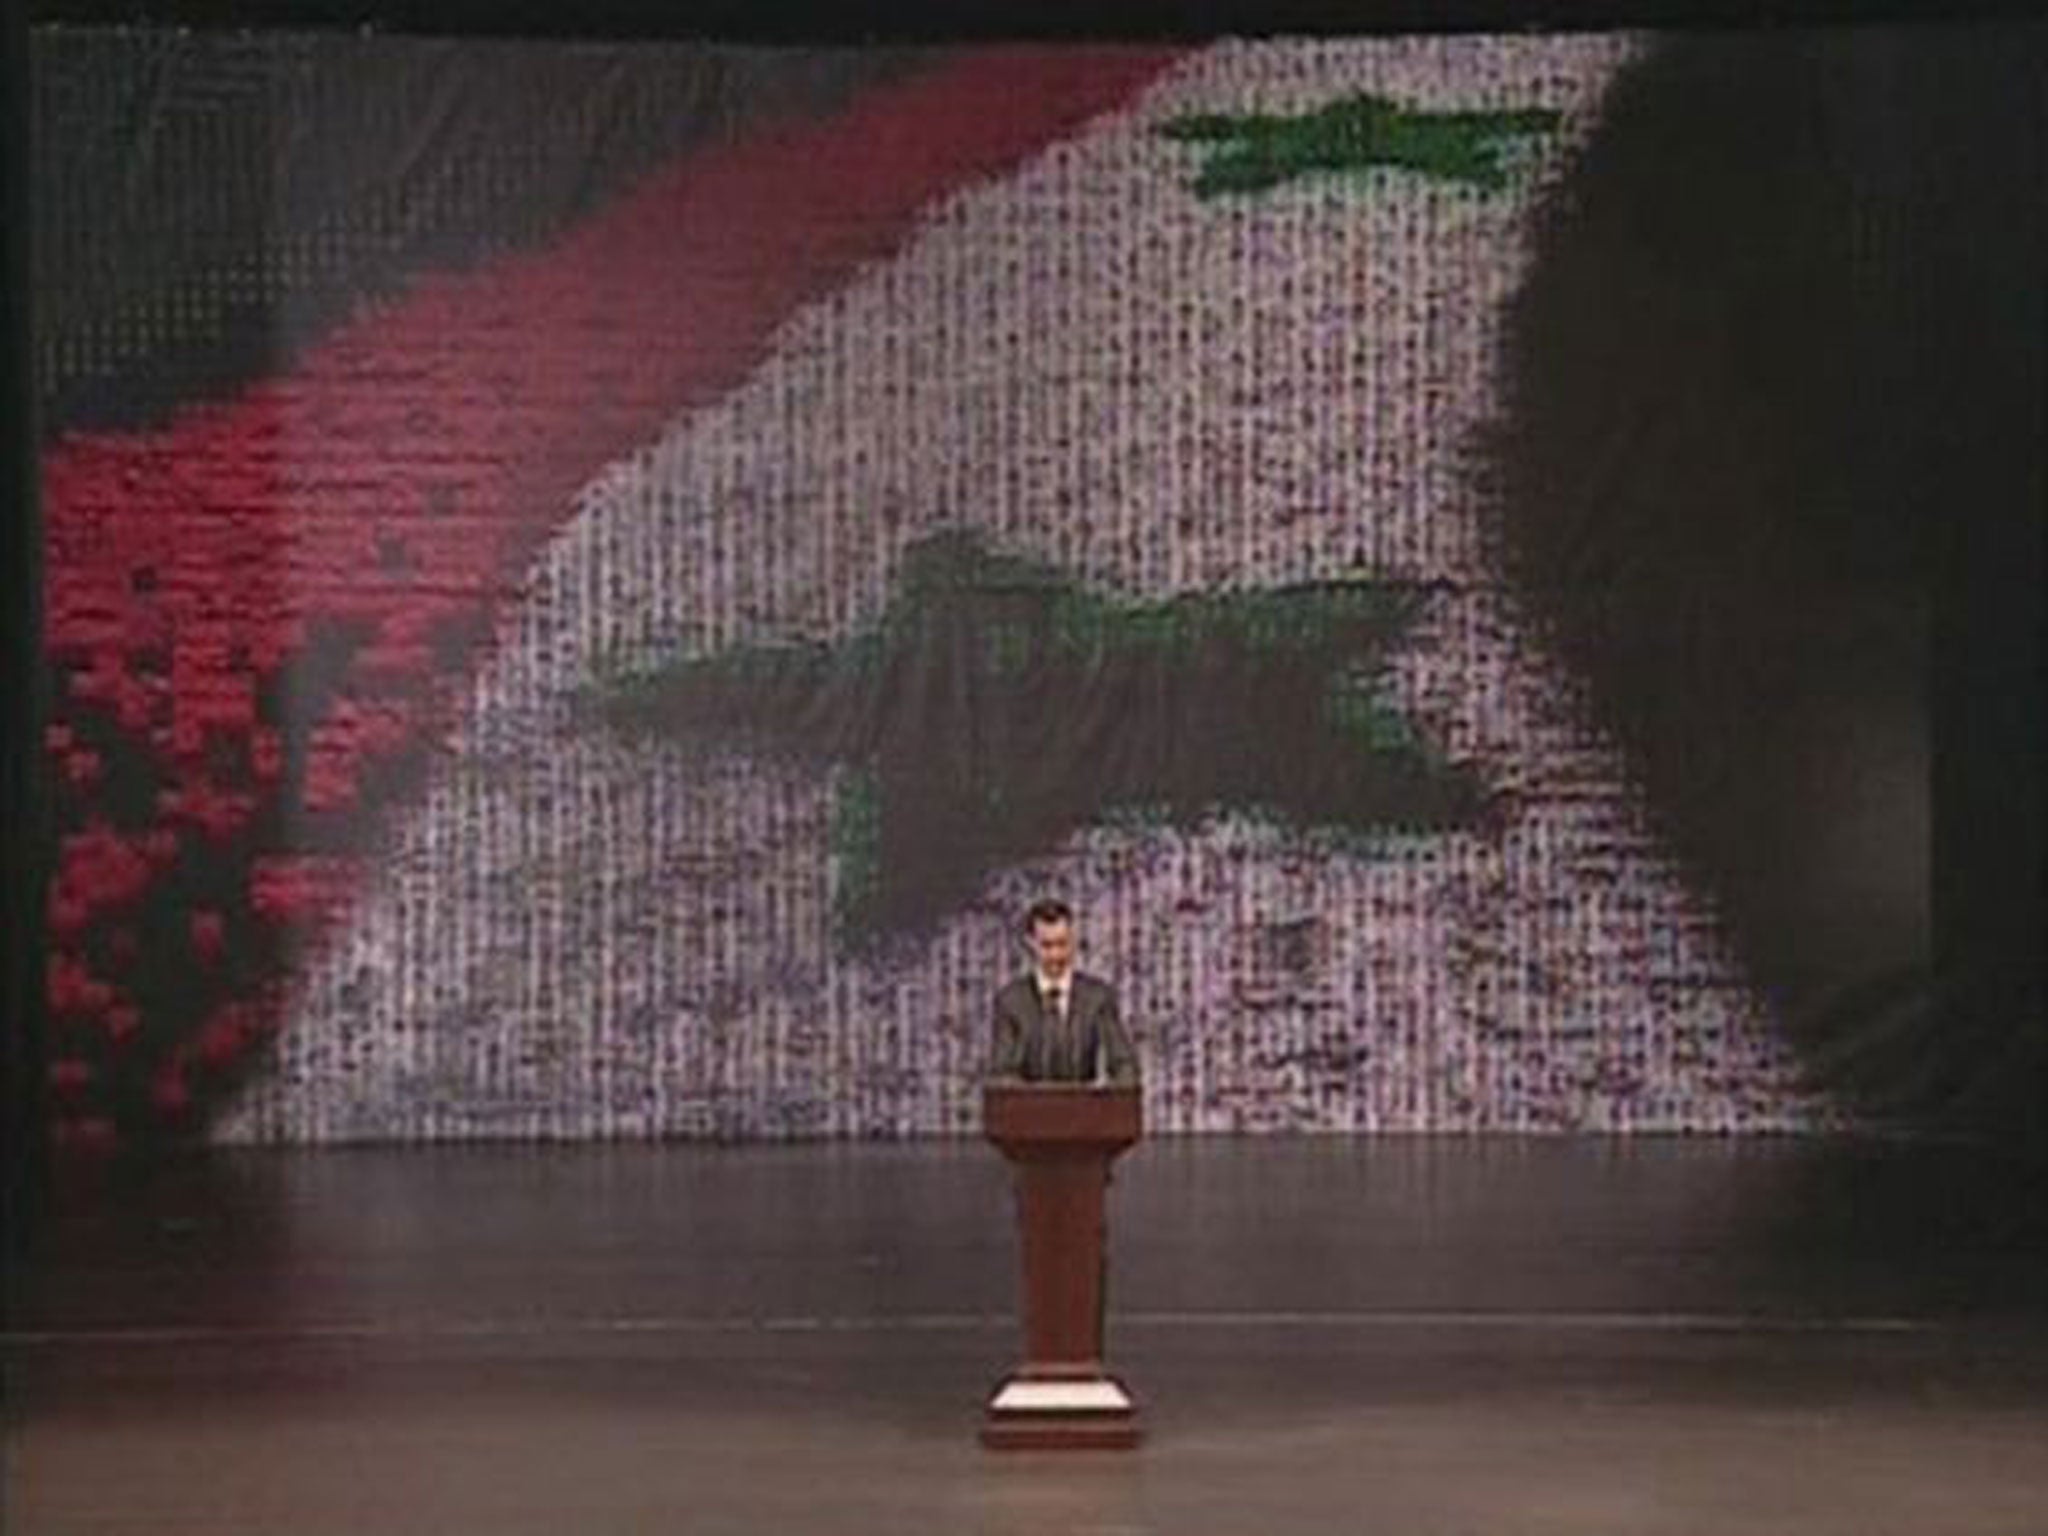 Syria's President Bashar al-Assad speaks at the Opera House in Damascus in this still image taken from video